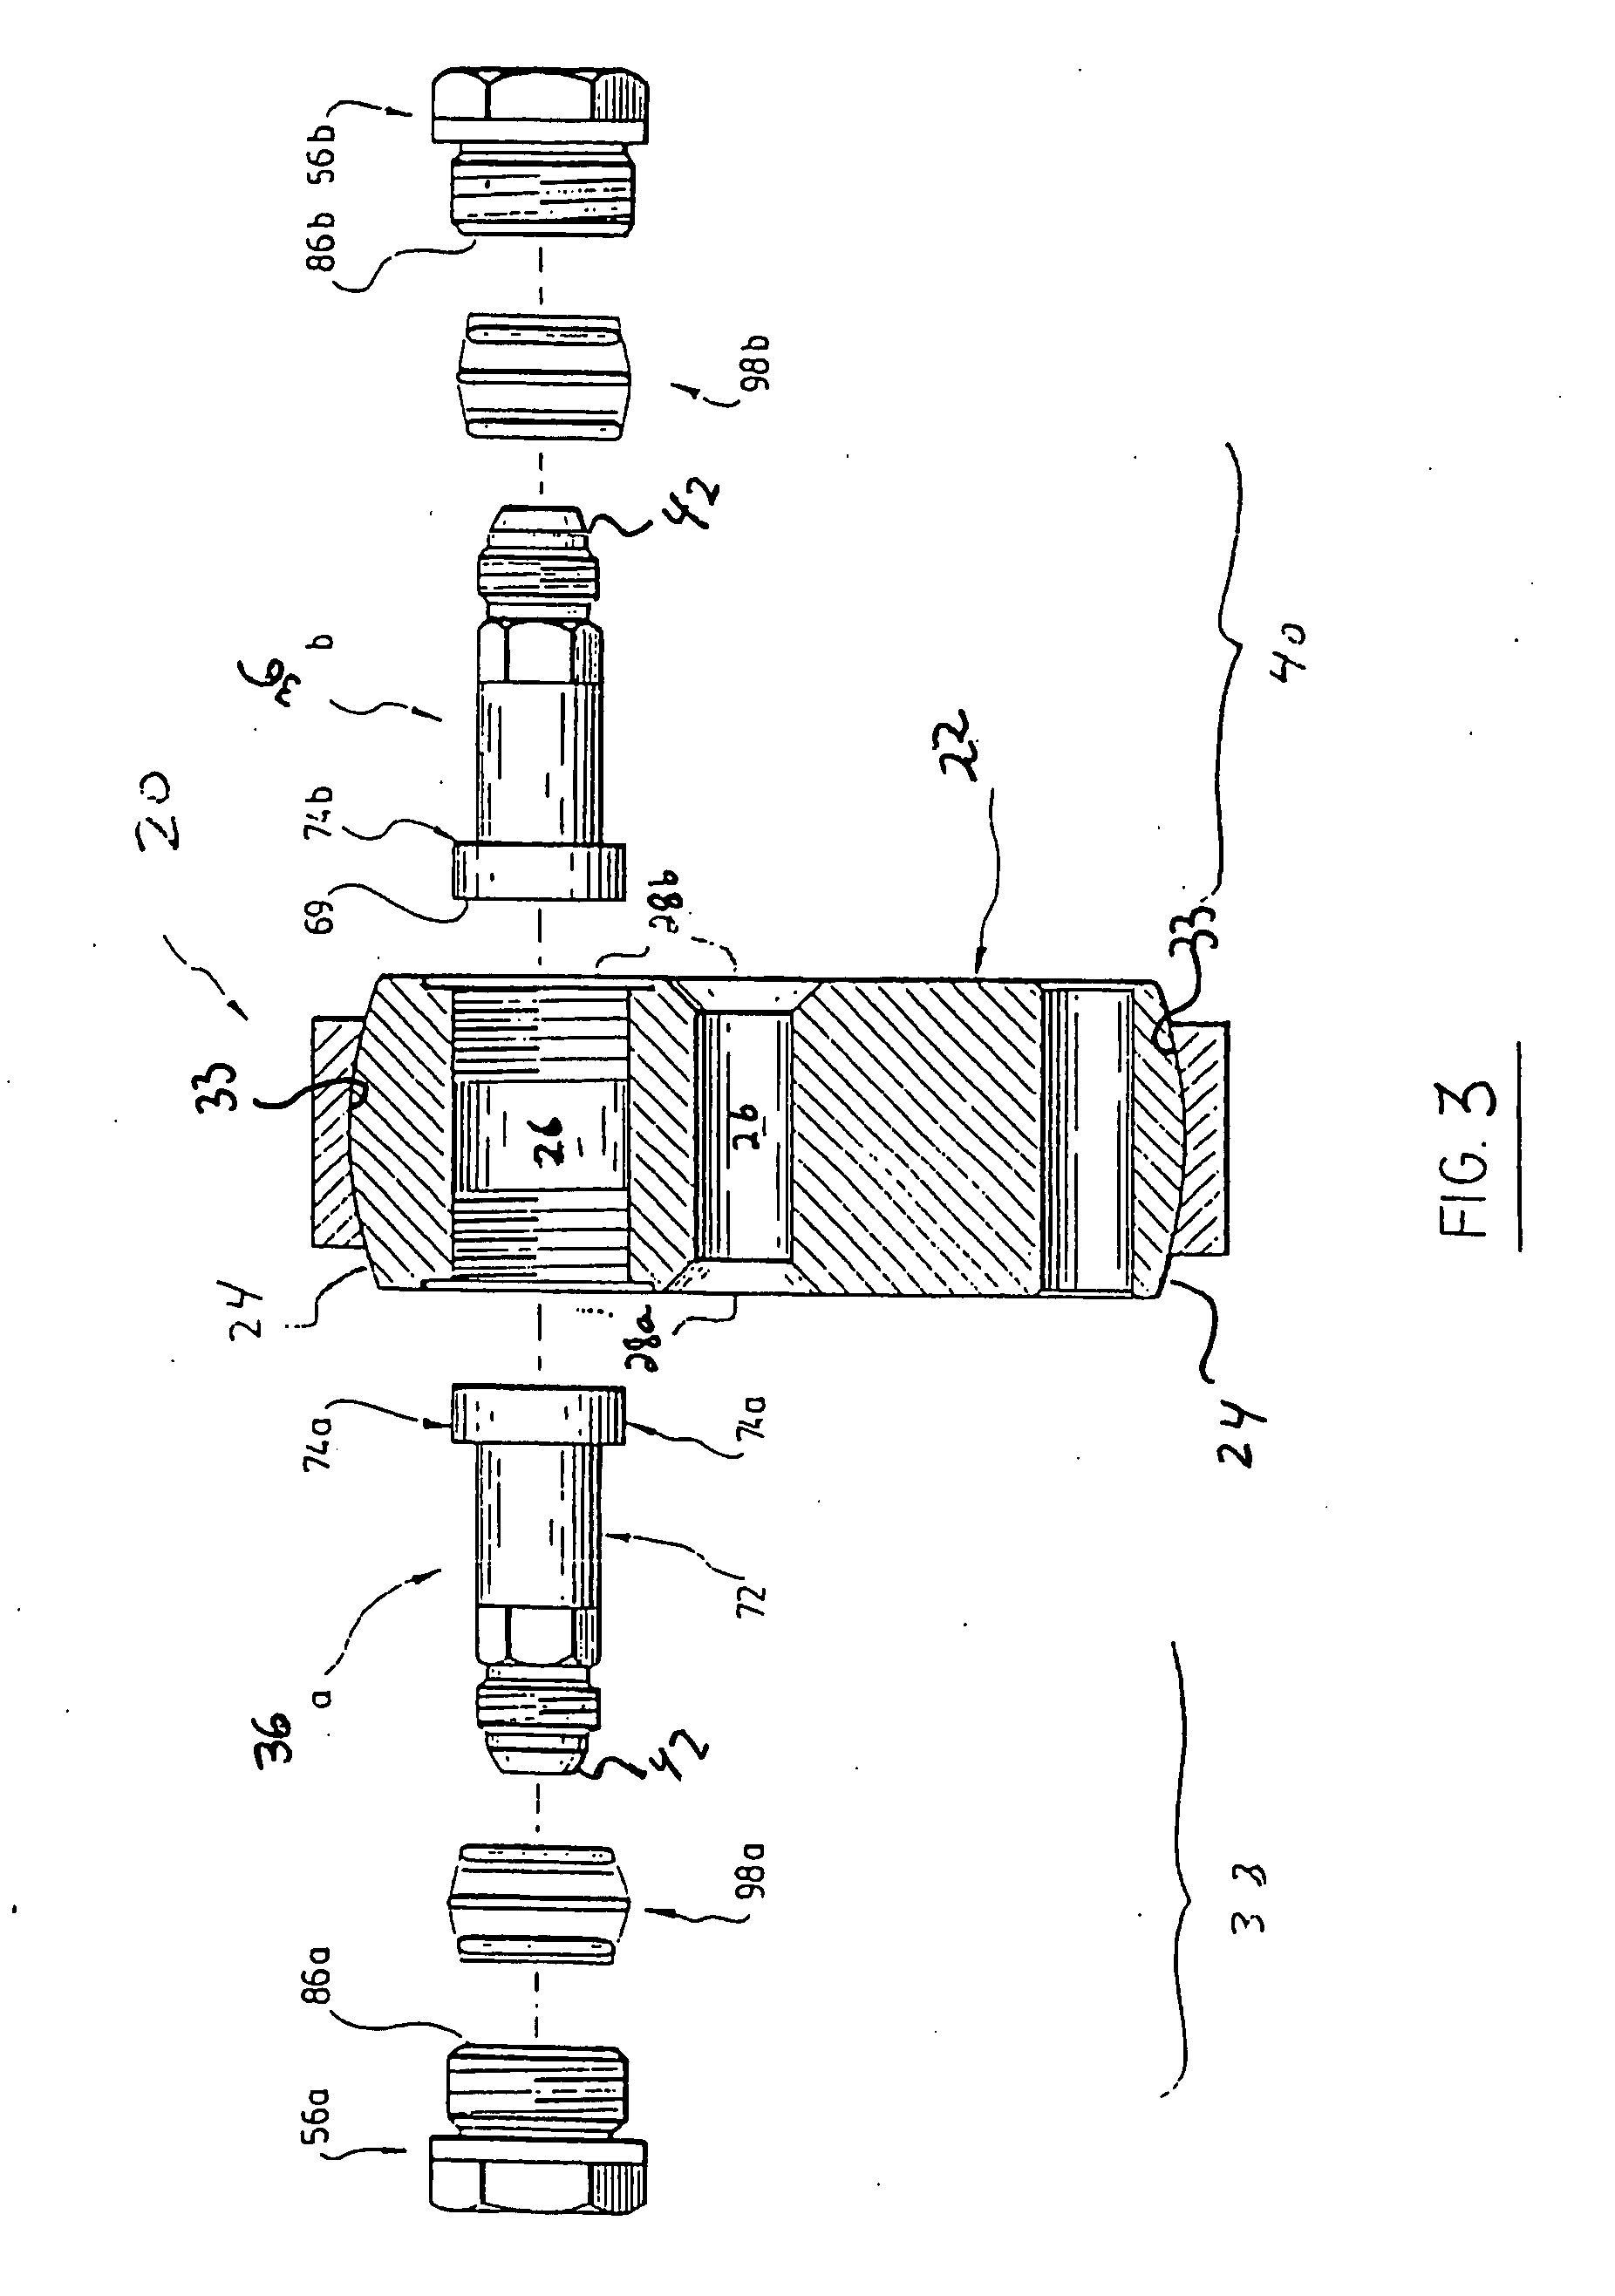 Multifunctionally swivelling coupling assembly for fluid lines